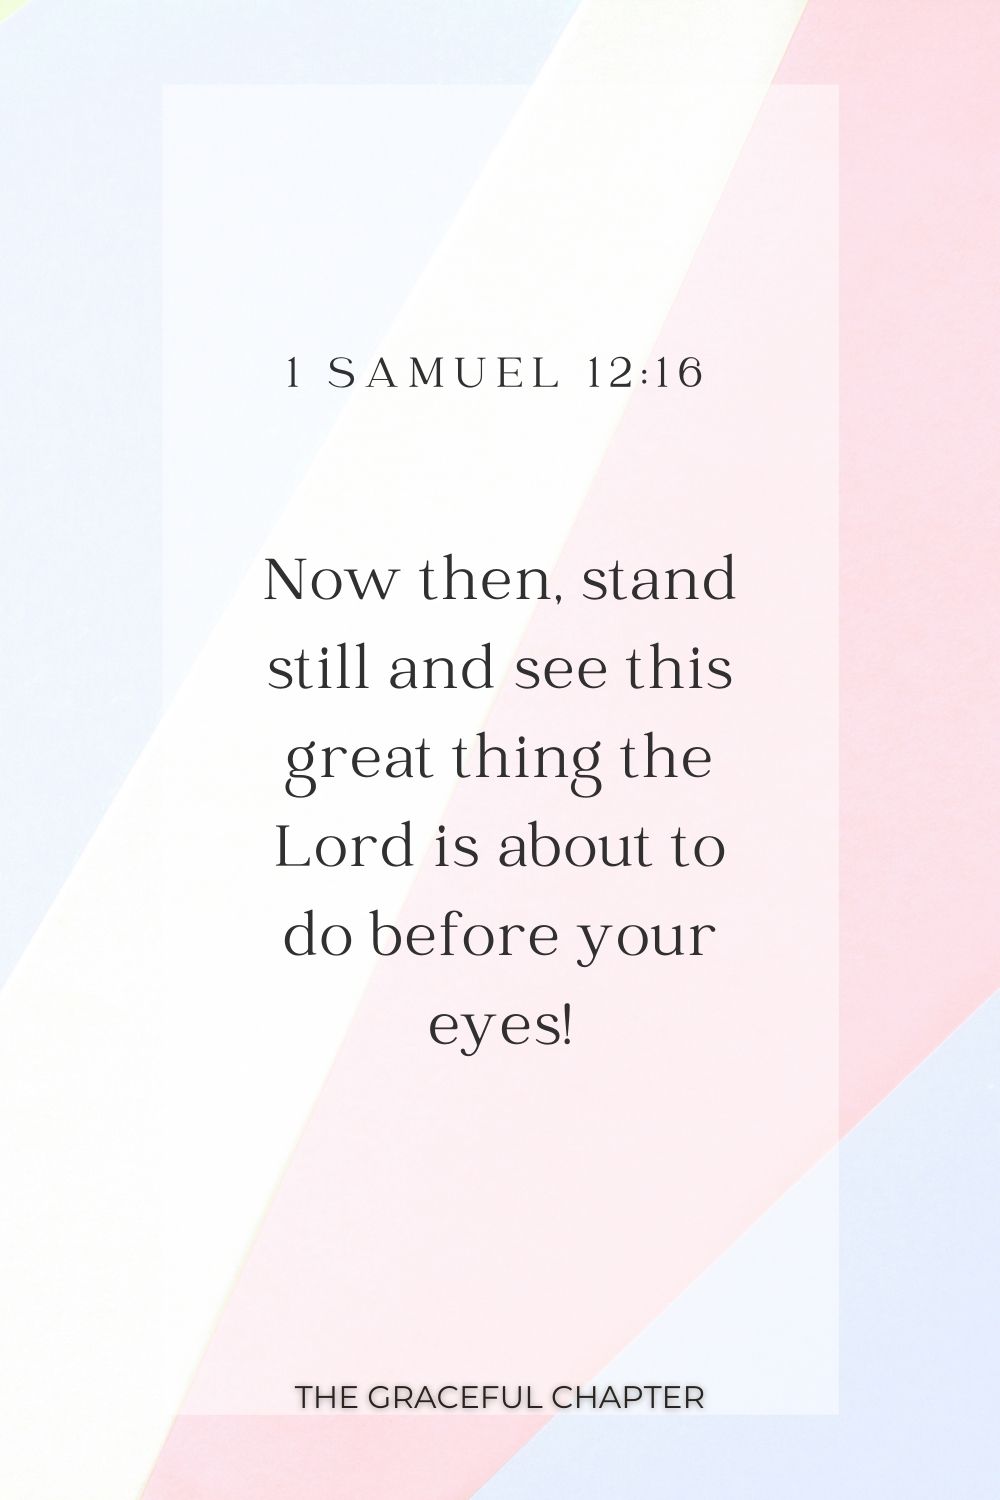 Now then, stand still and see this great thing the Lord is about to do before your eyes! 1 Samuel 12:16